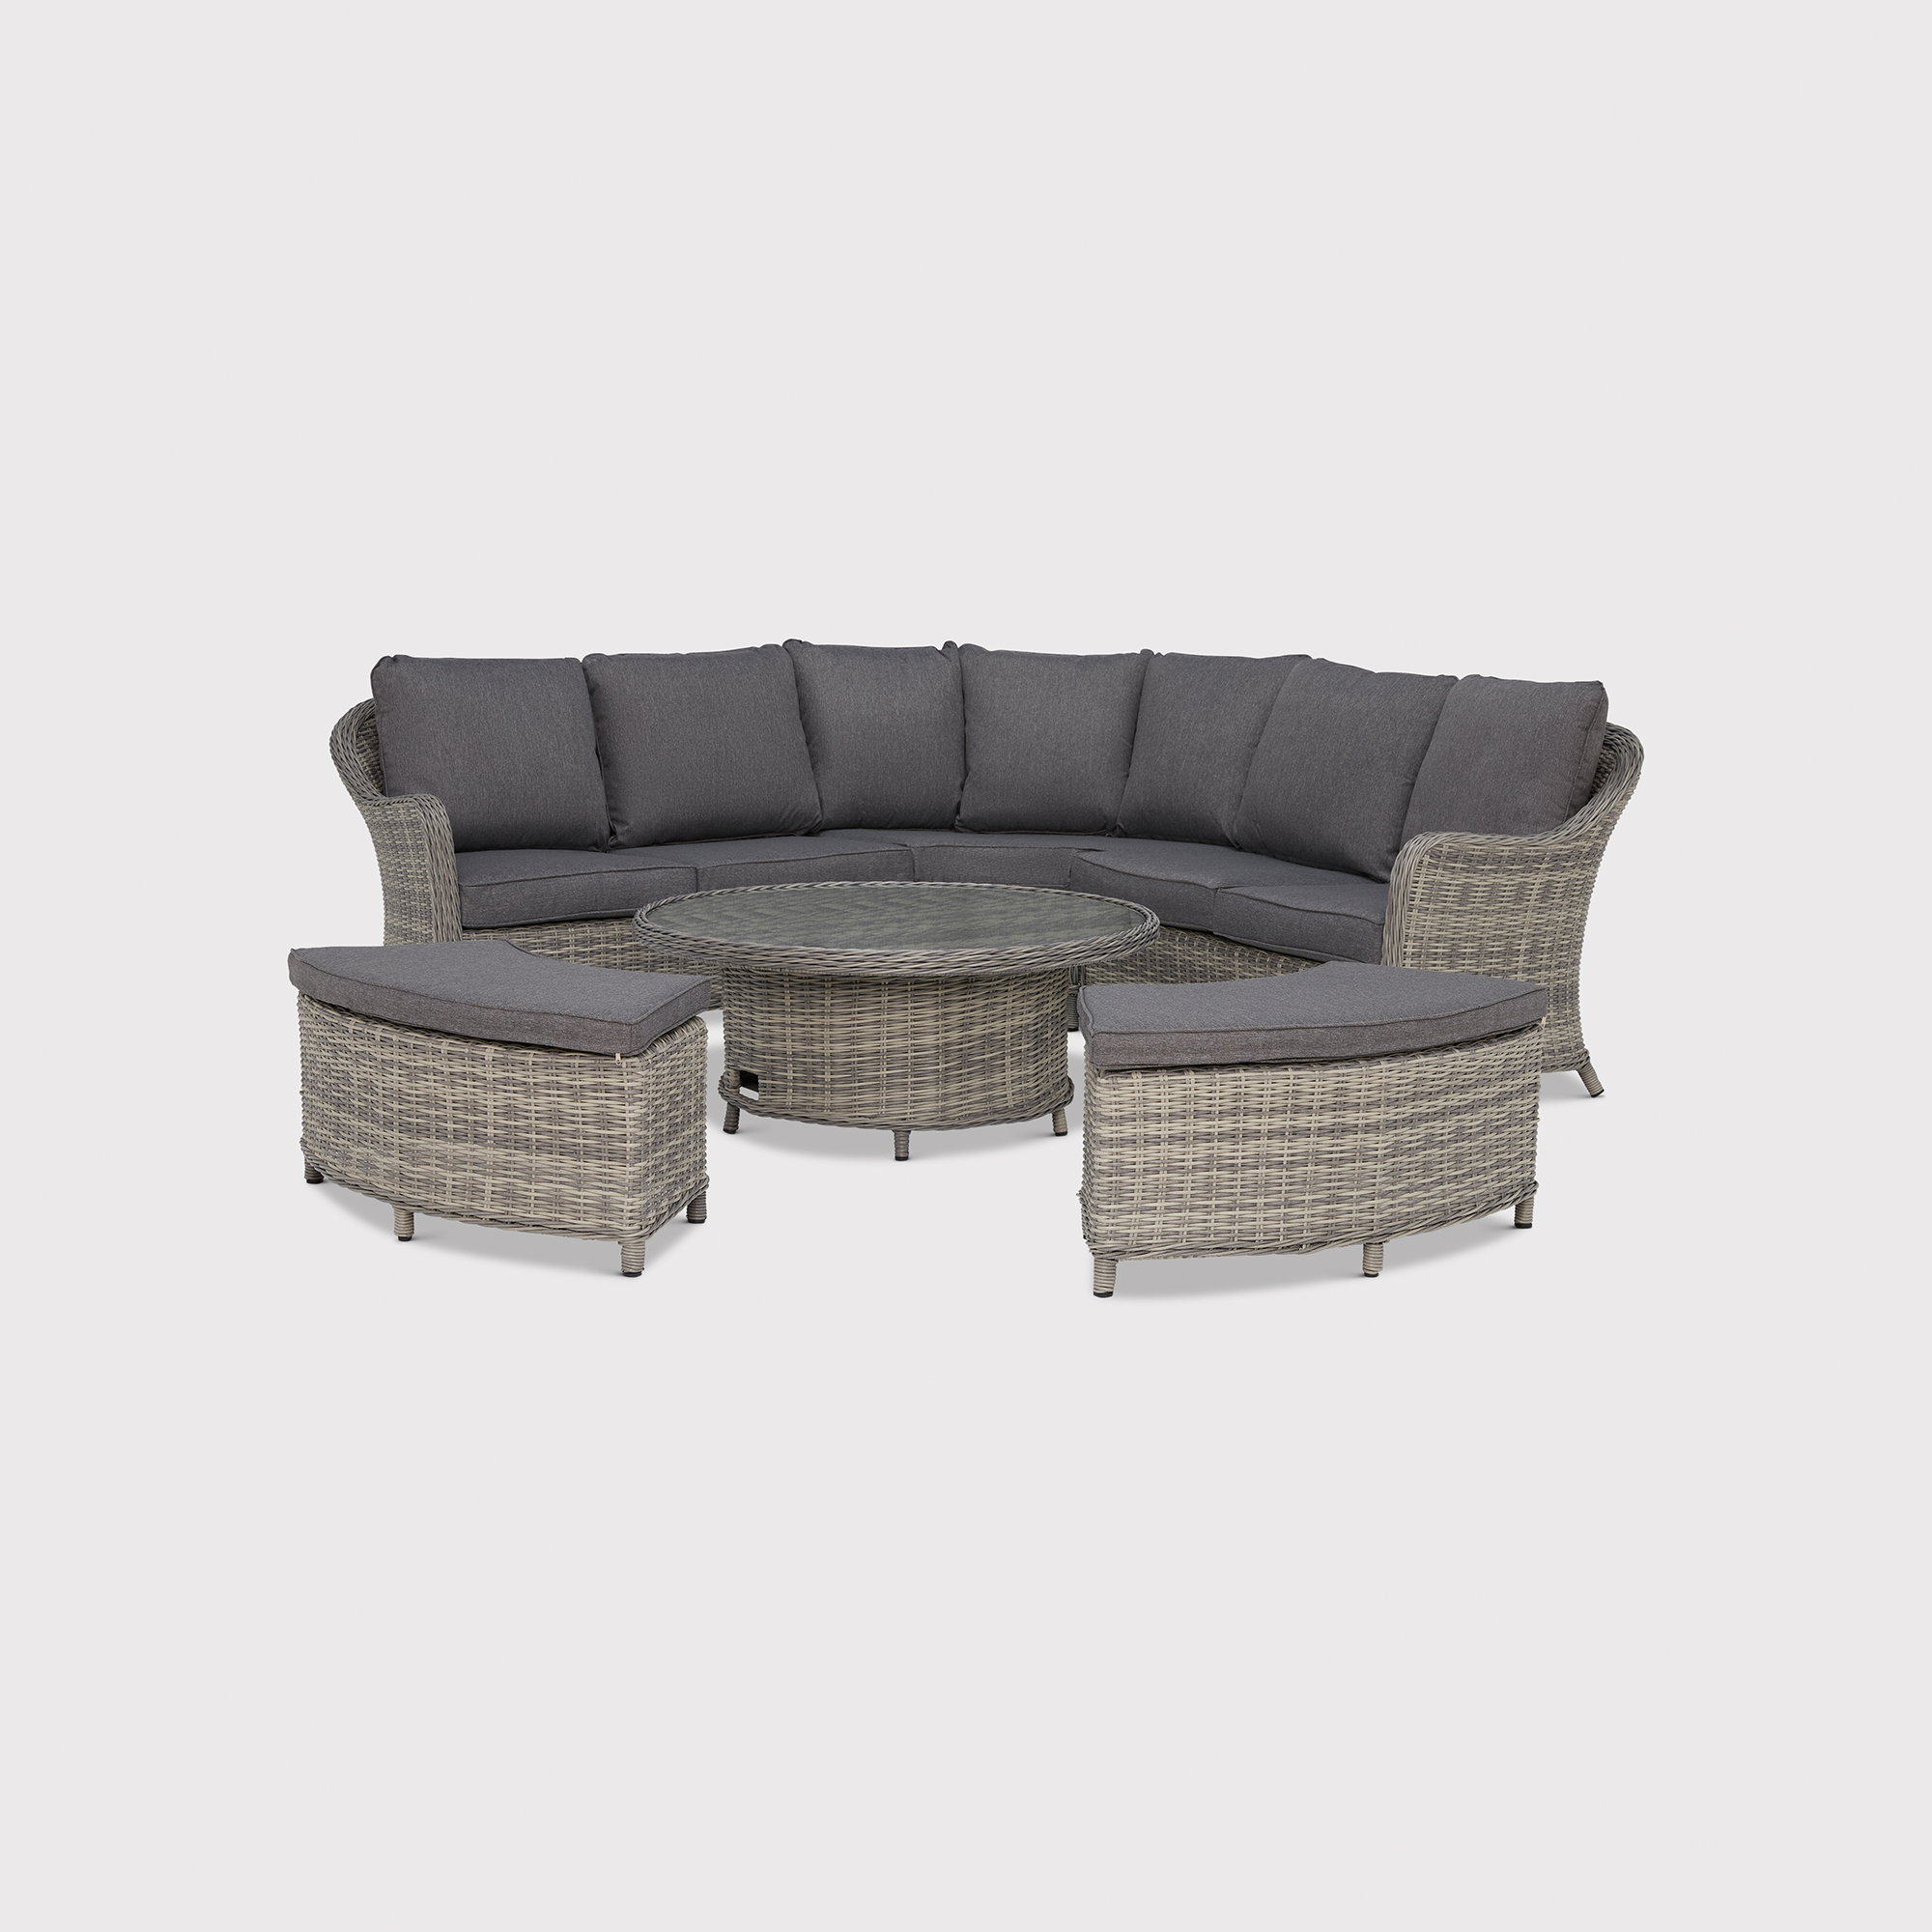 Penzance Rounded Corner Sofa With Rising Table, Grey | Barker & Stonehouse